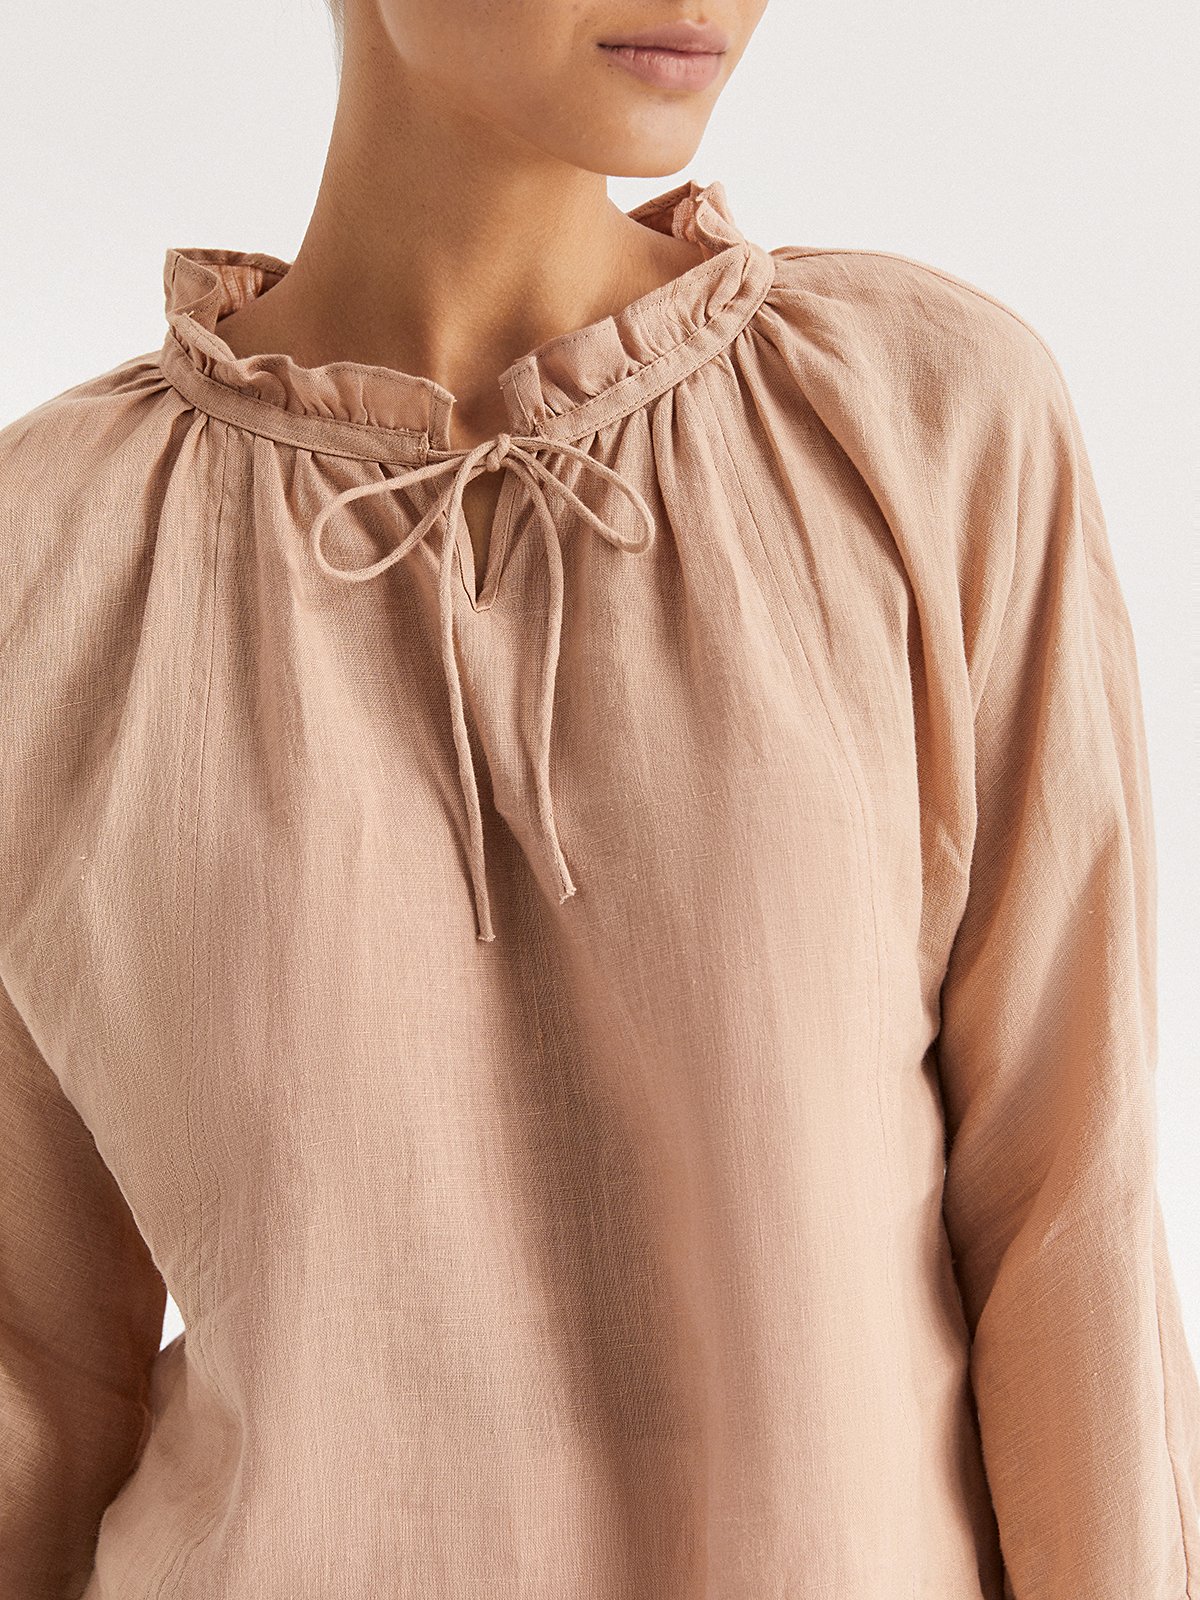 Valencia 100%  Linen Shirt with Lace Collar